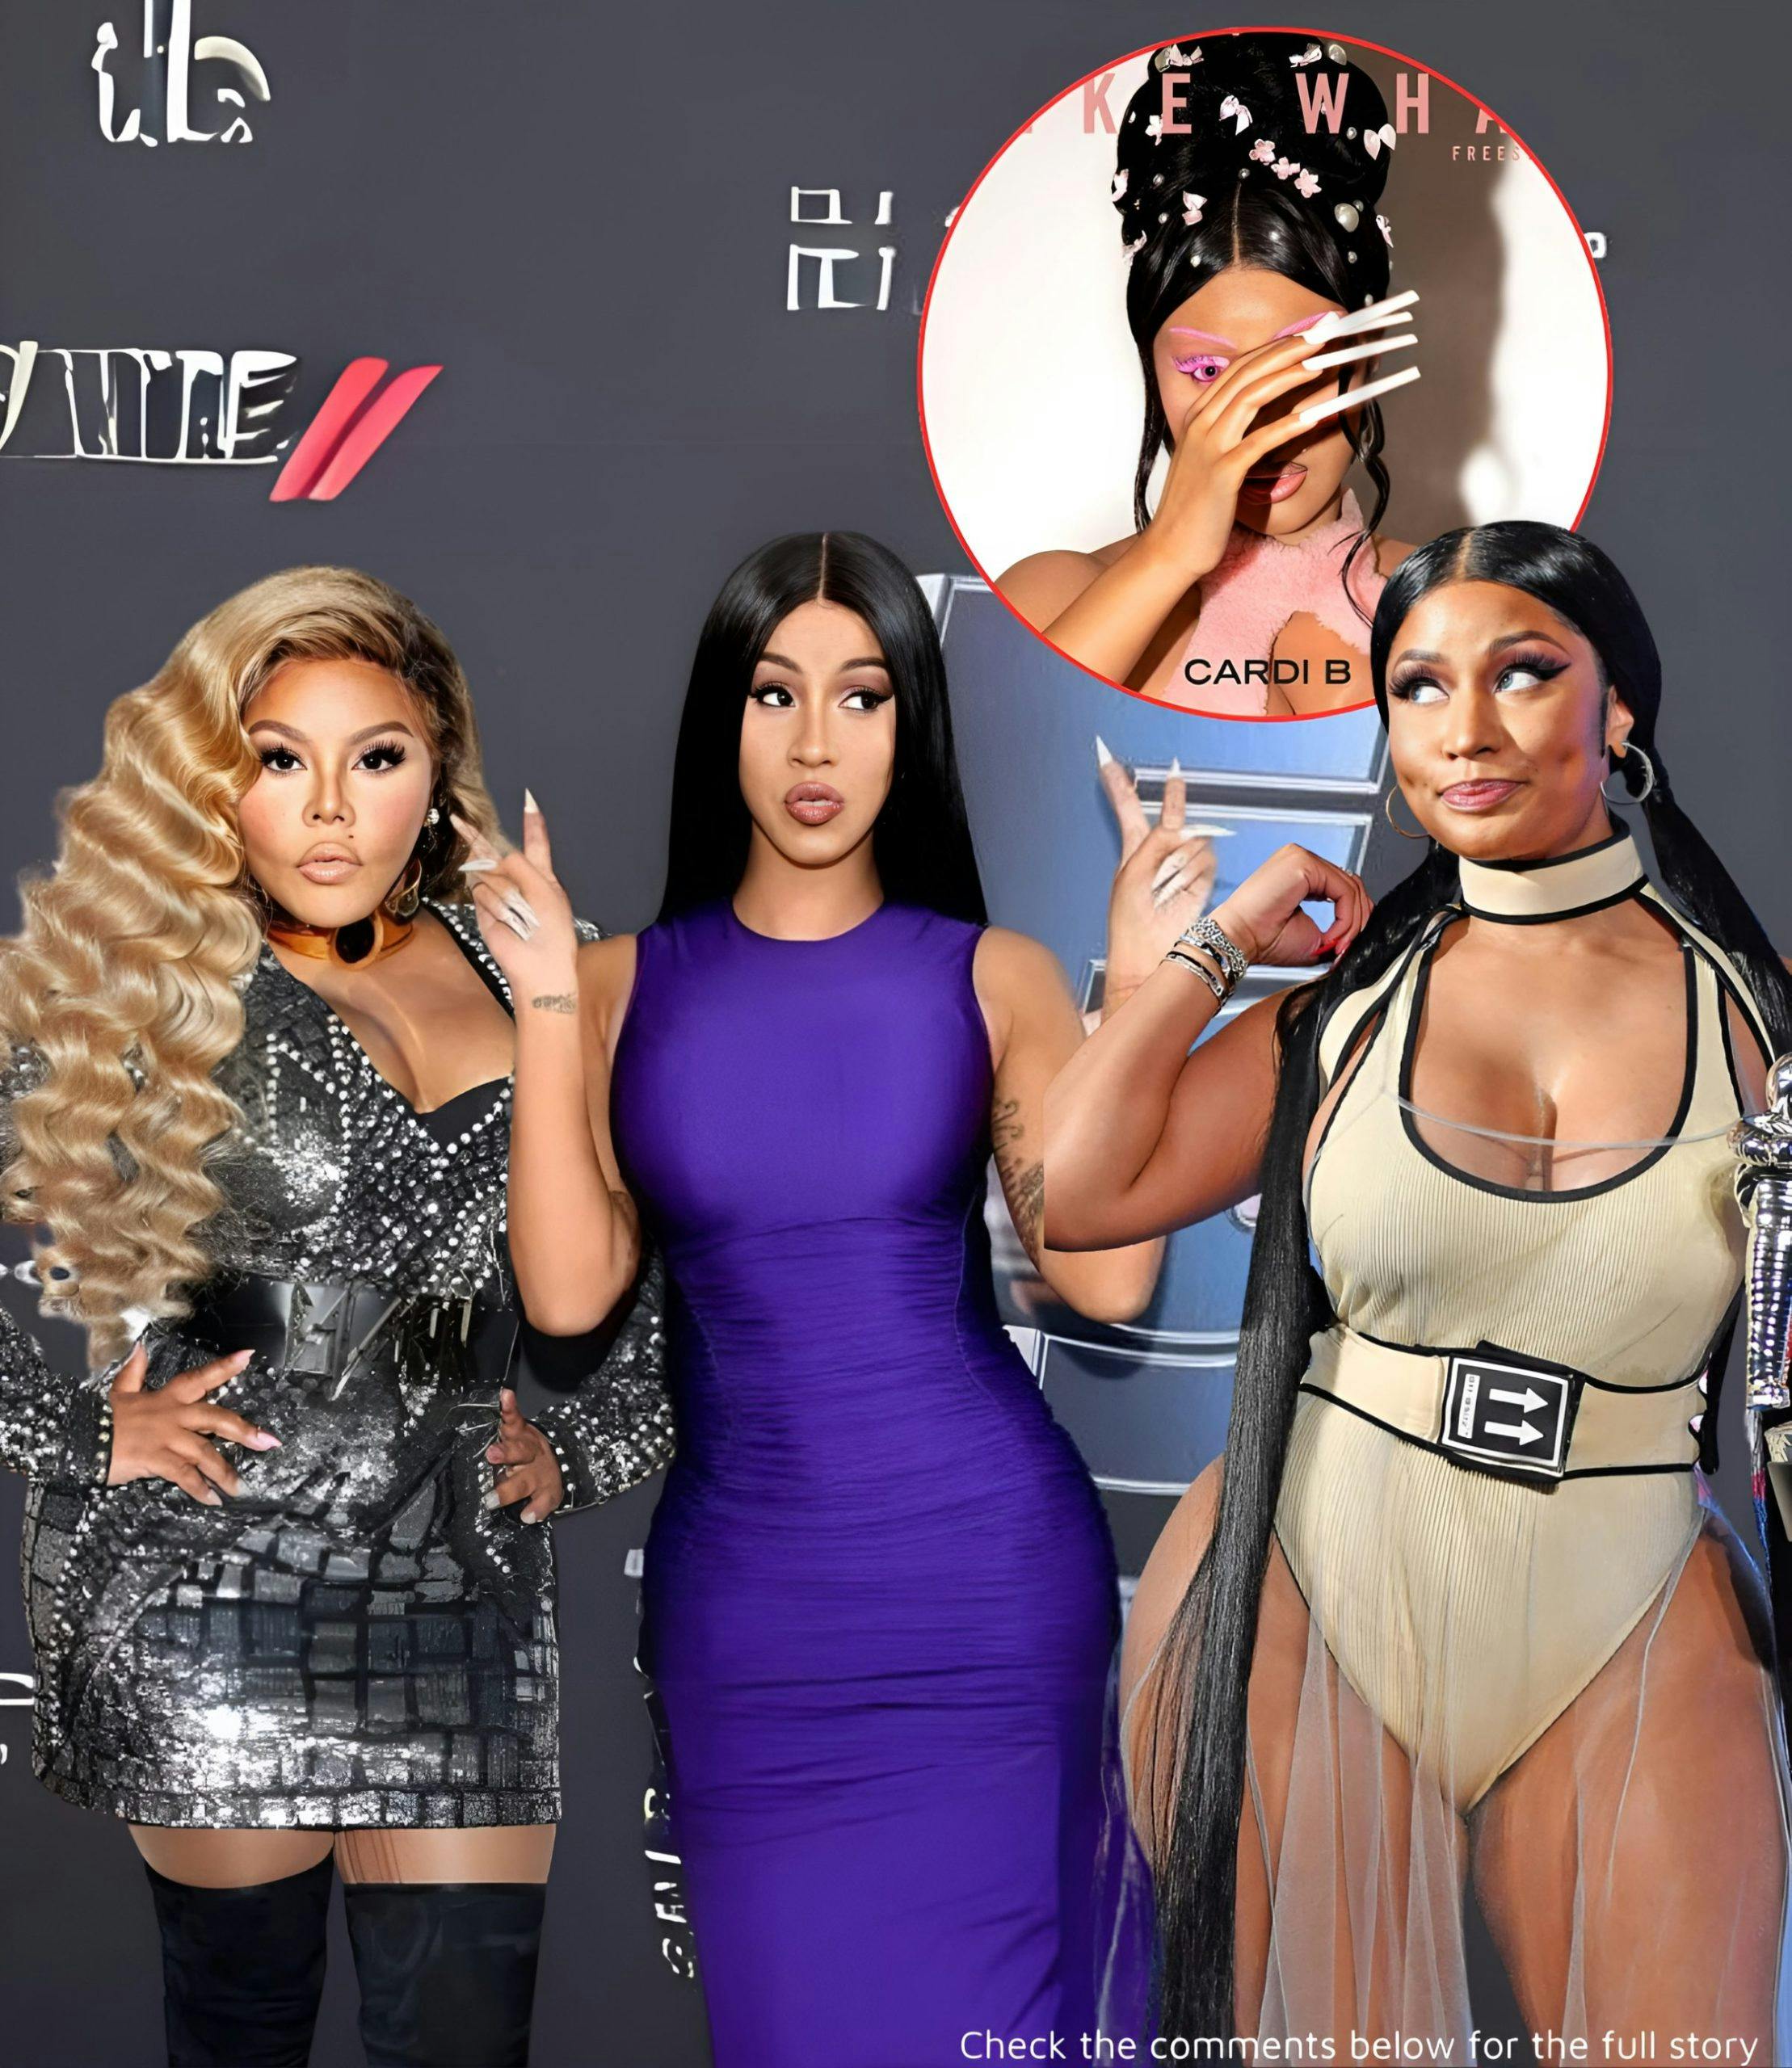 Cover Image for ‘You dumb, you slow, you wildin’: Cardi B Appears to Shade Nicki Minaj in New ‘Like What’ Song, Honors Lil’ Kim in the Video